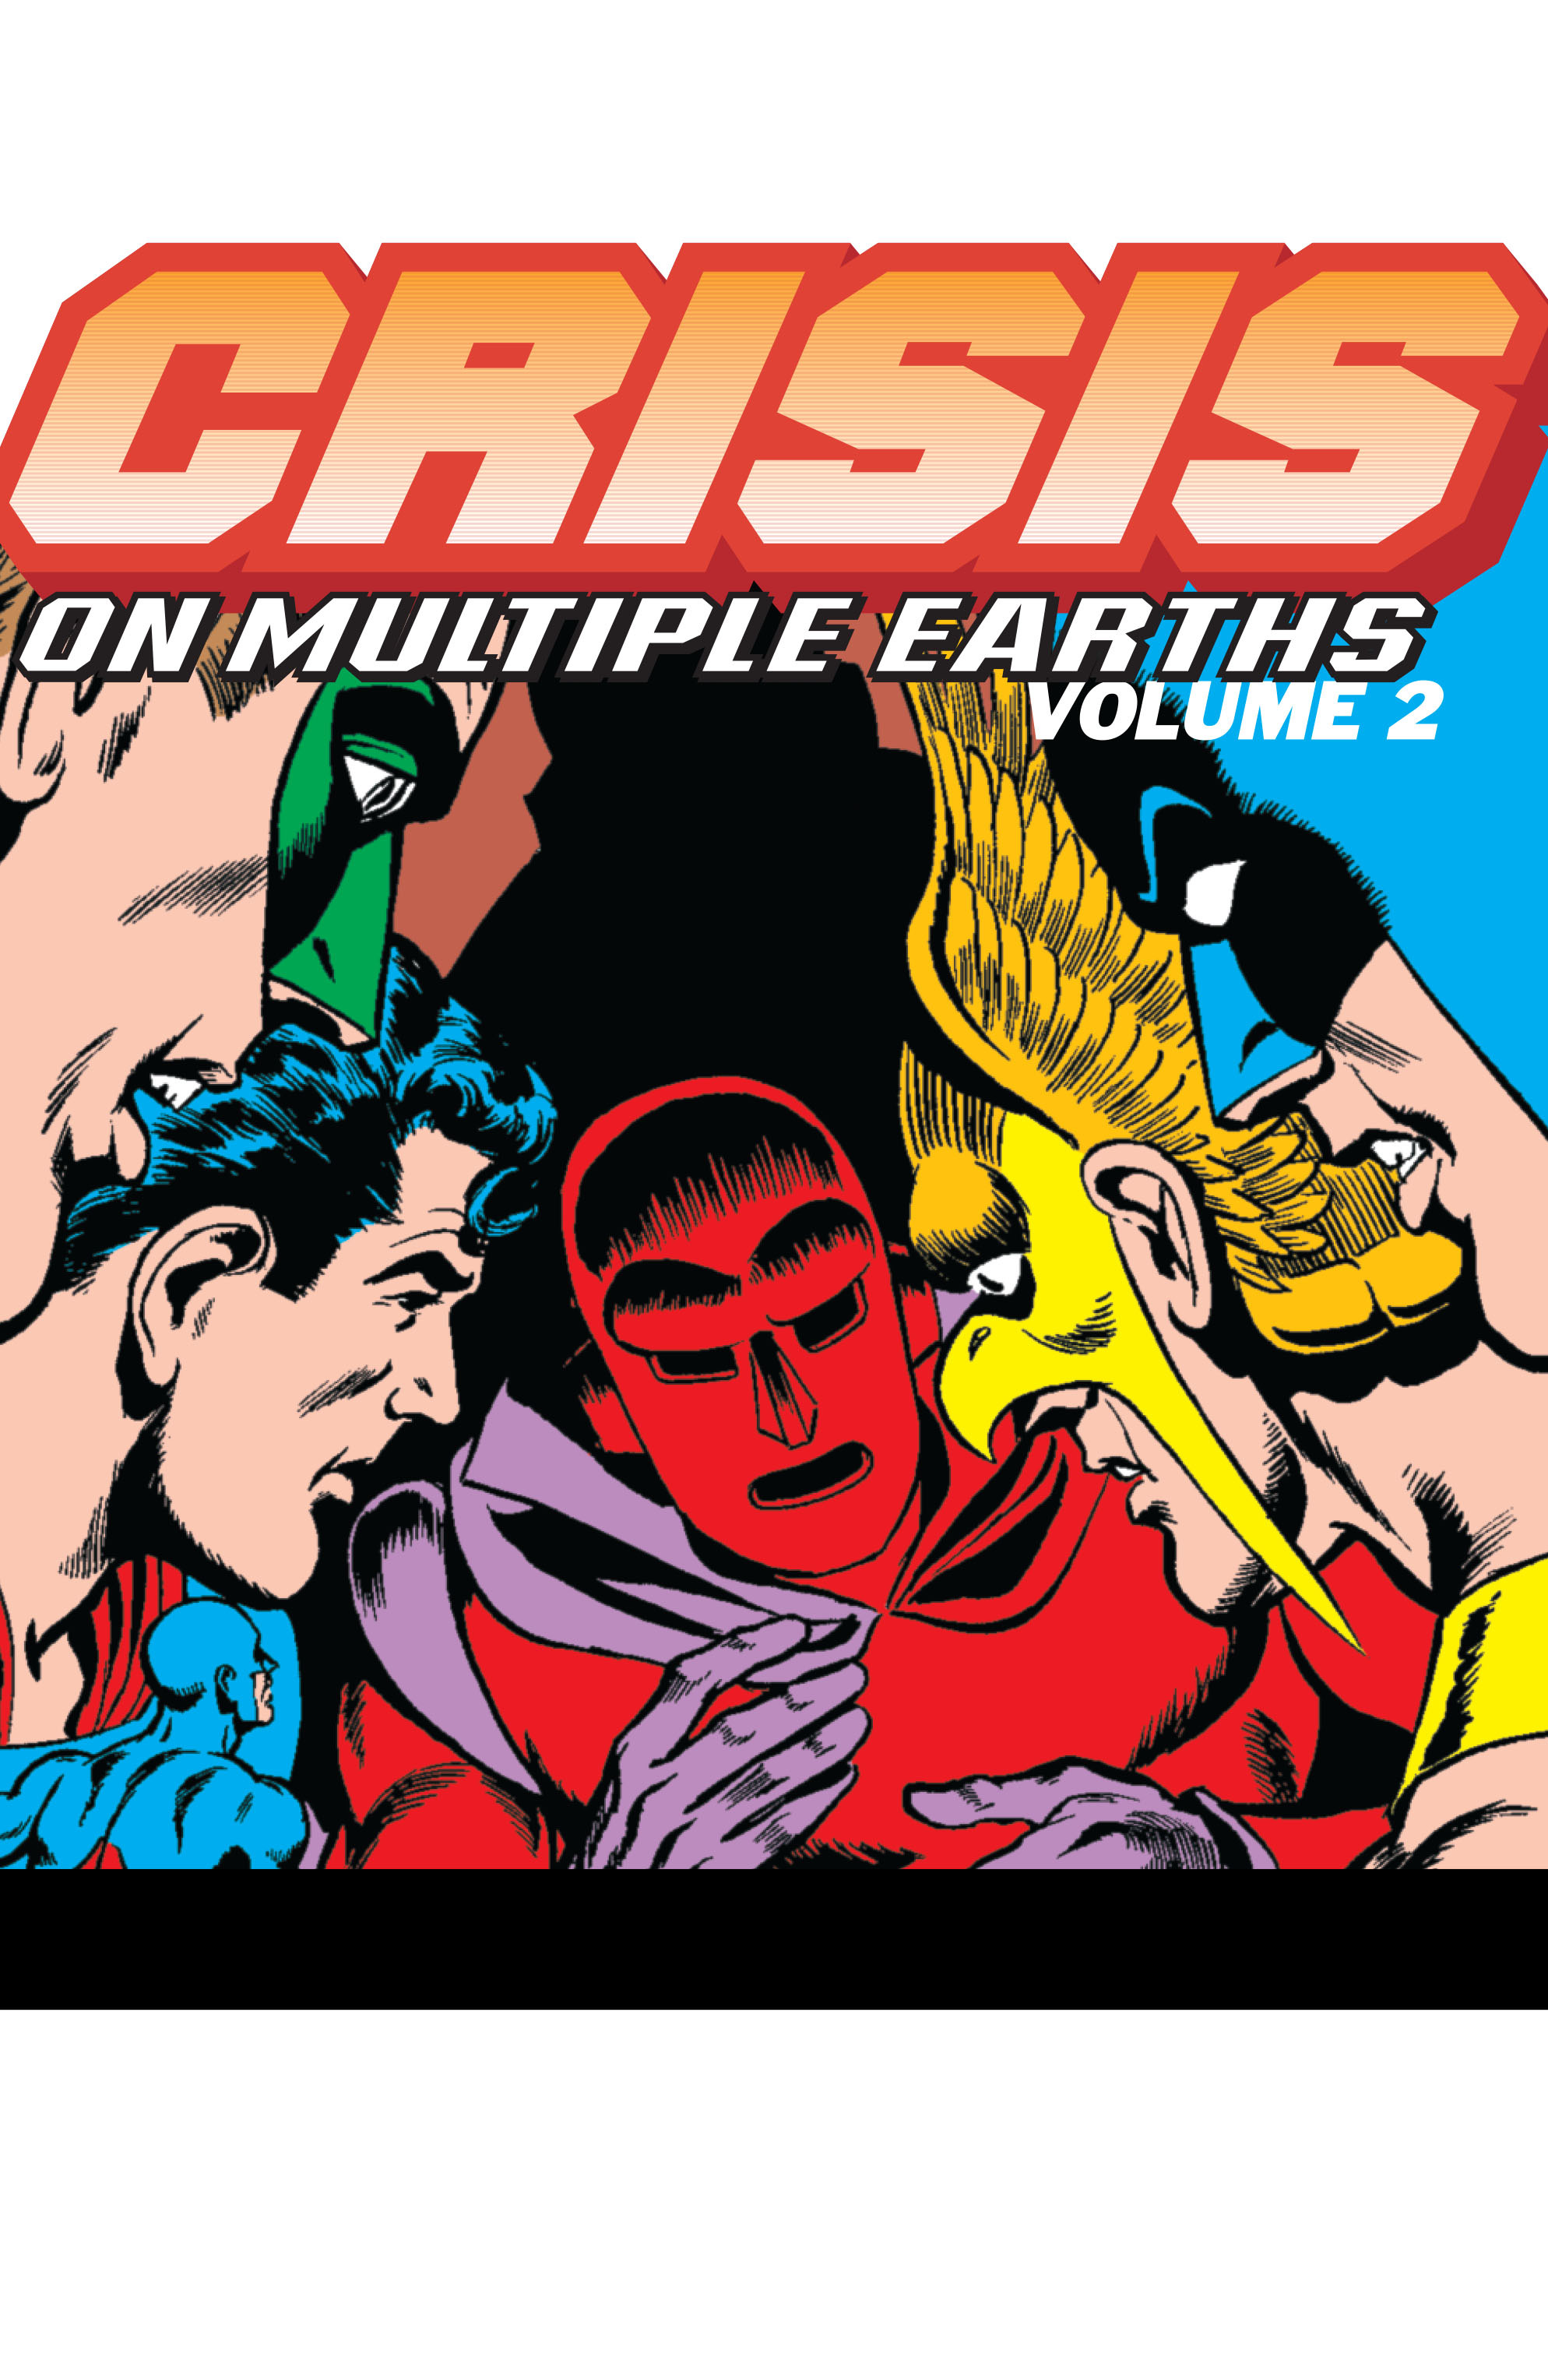 Read online Crisis on Multiple Earths comic -  Issue # TPB 2 - 2